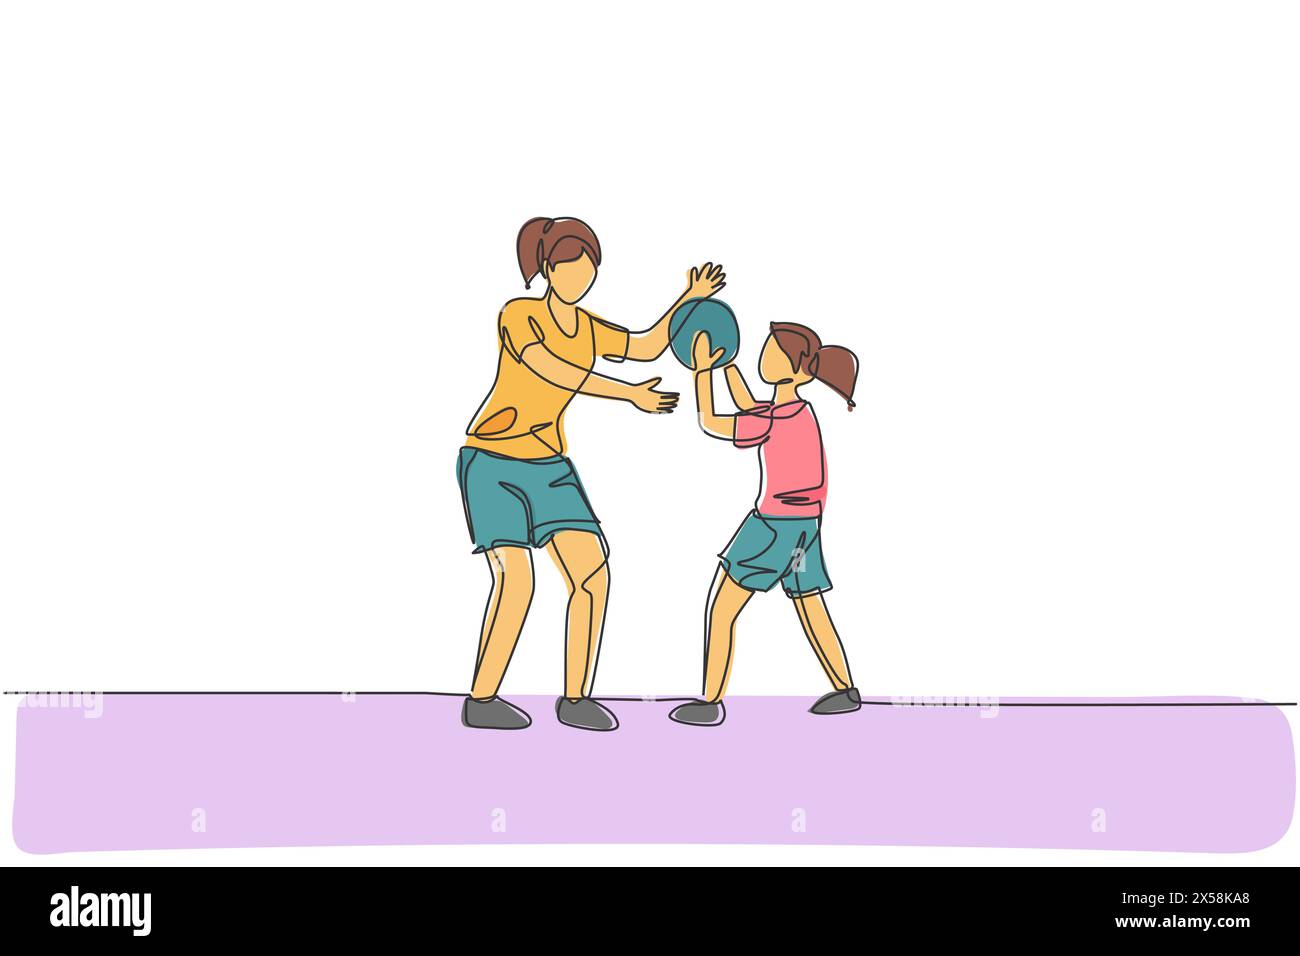 One single line drawing of young mother playing basketball fun with her daughter at home field vector illustration. Happy parenting learning concept. Stock Vector